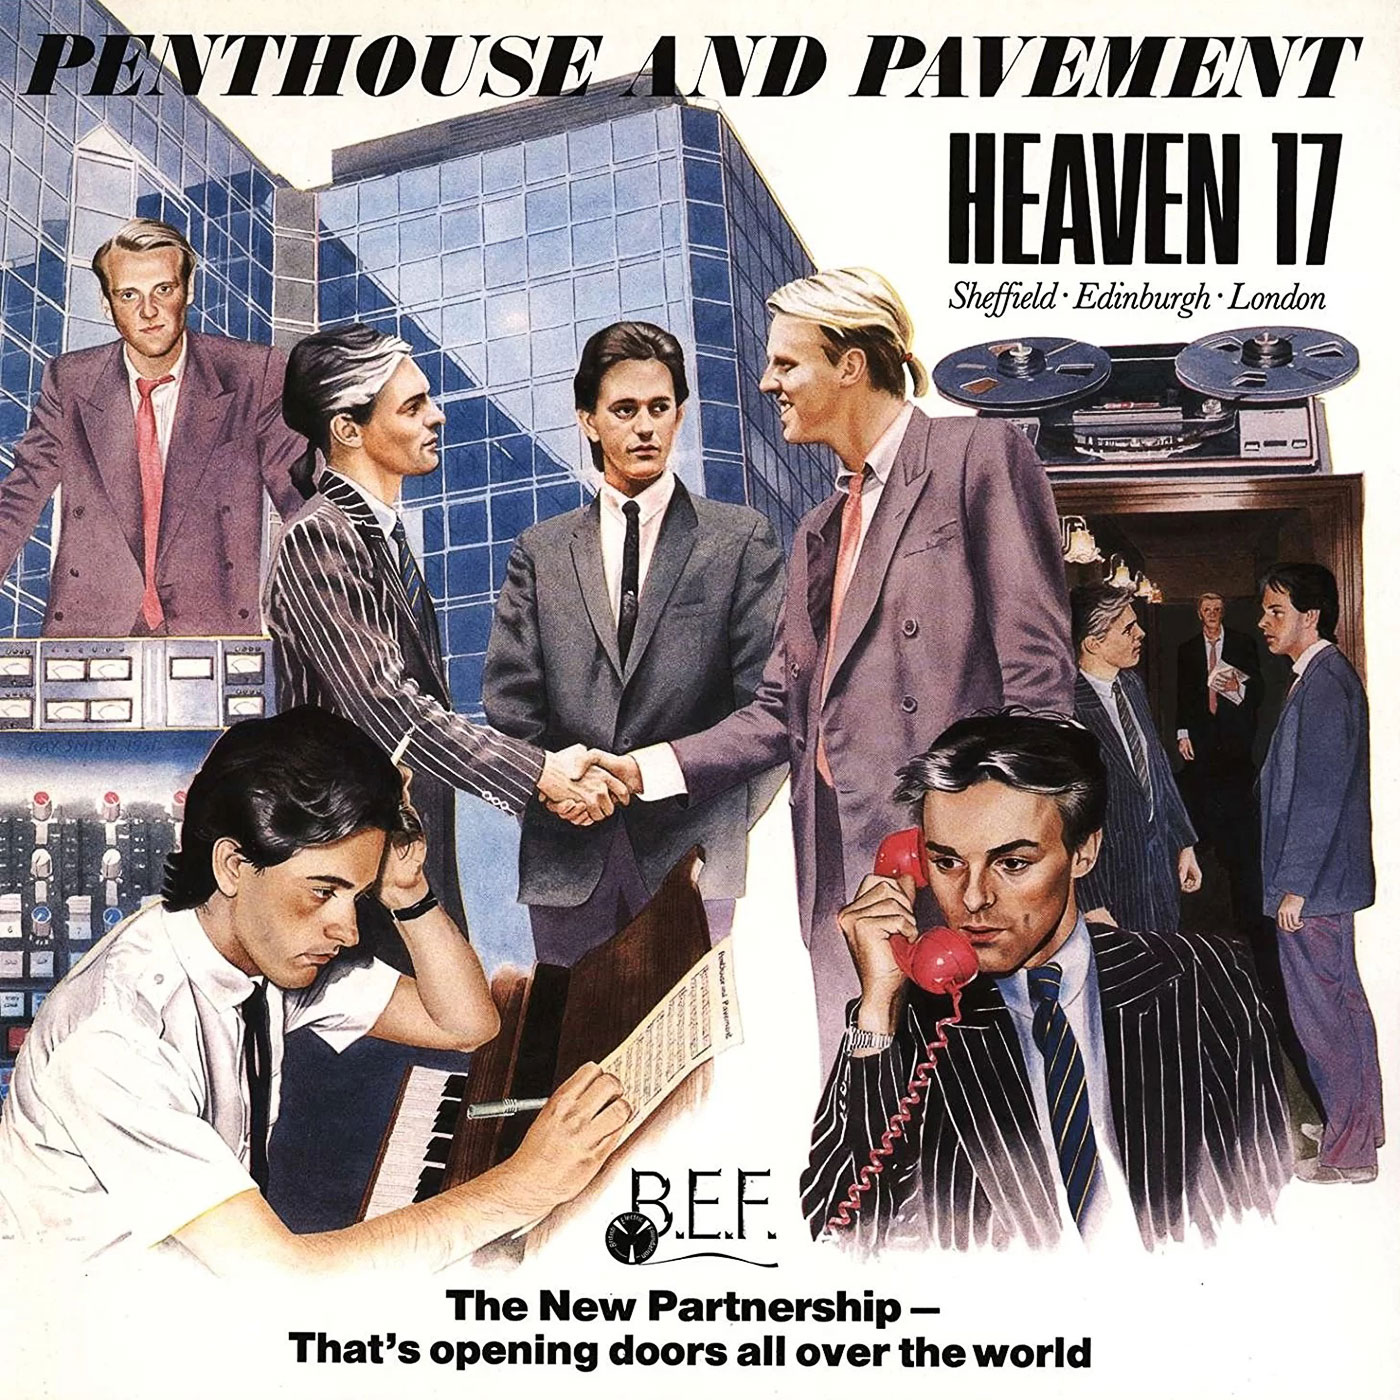 480 Heaven 17 – Penthouse and Pavement